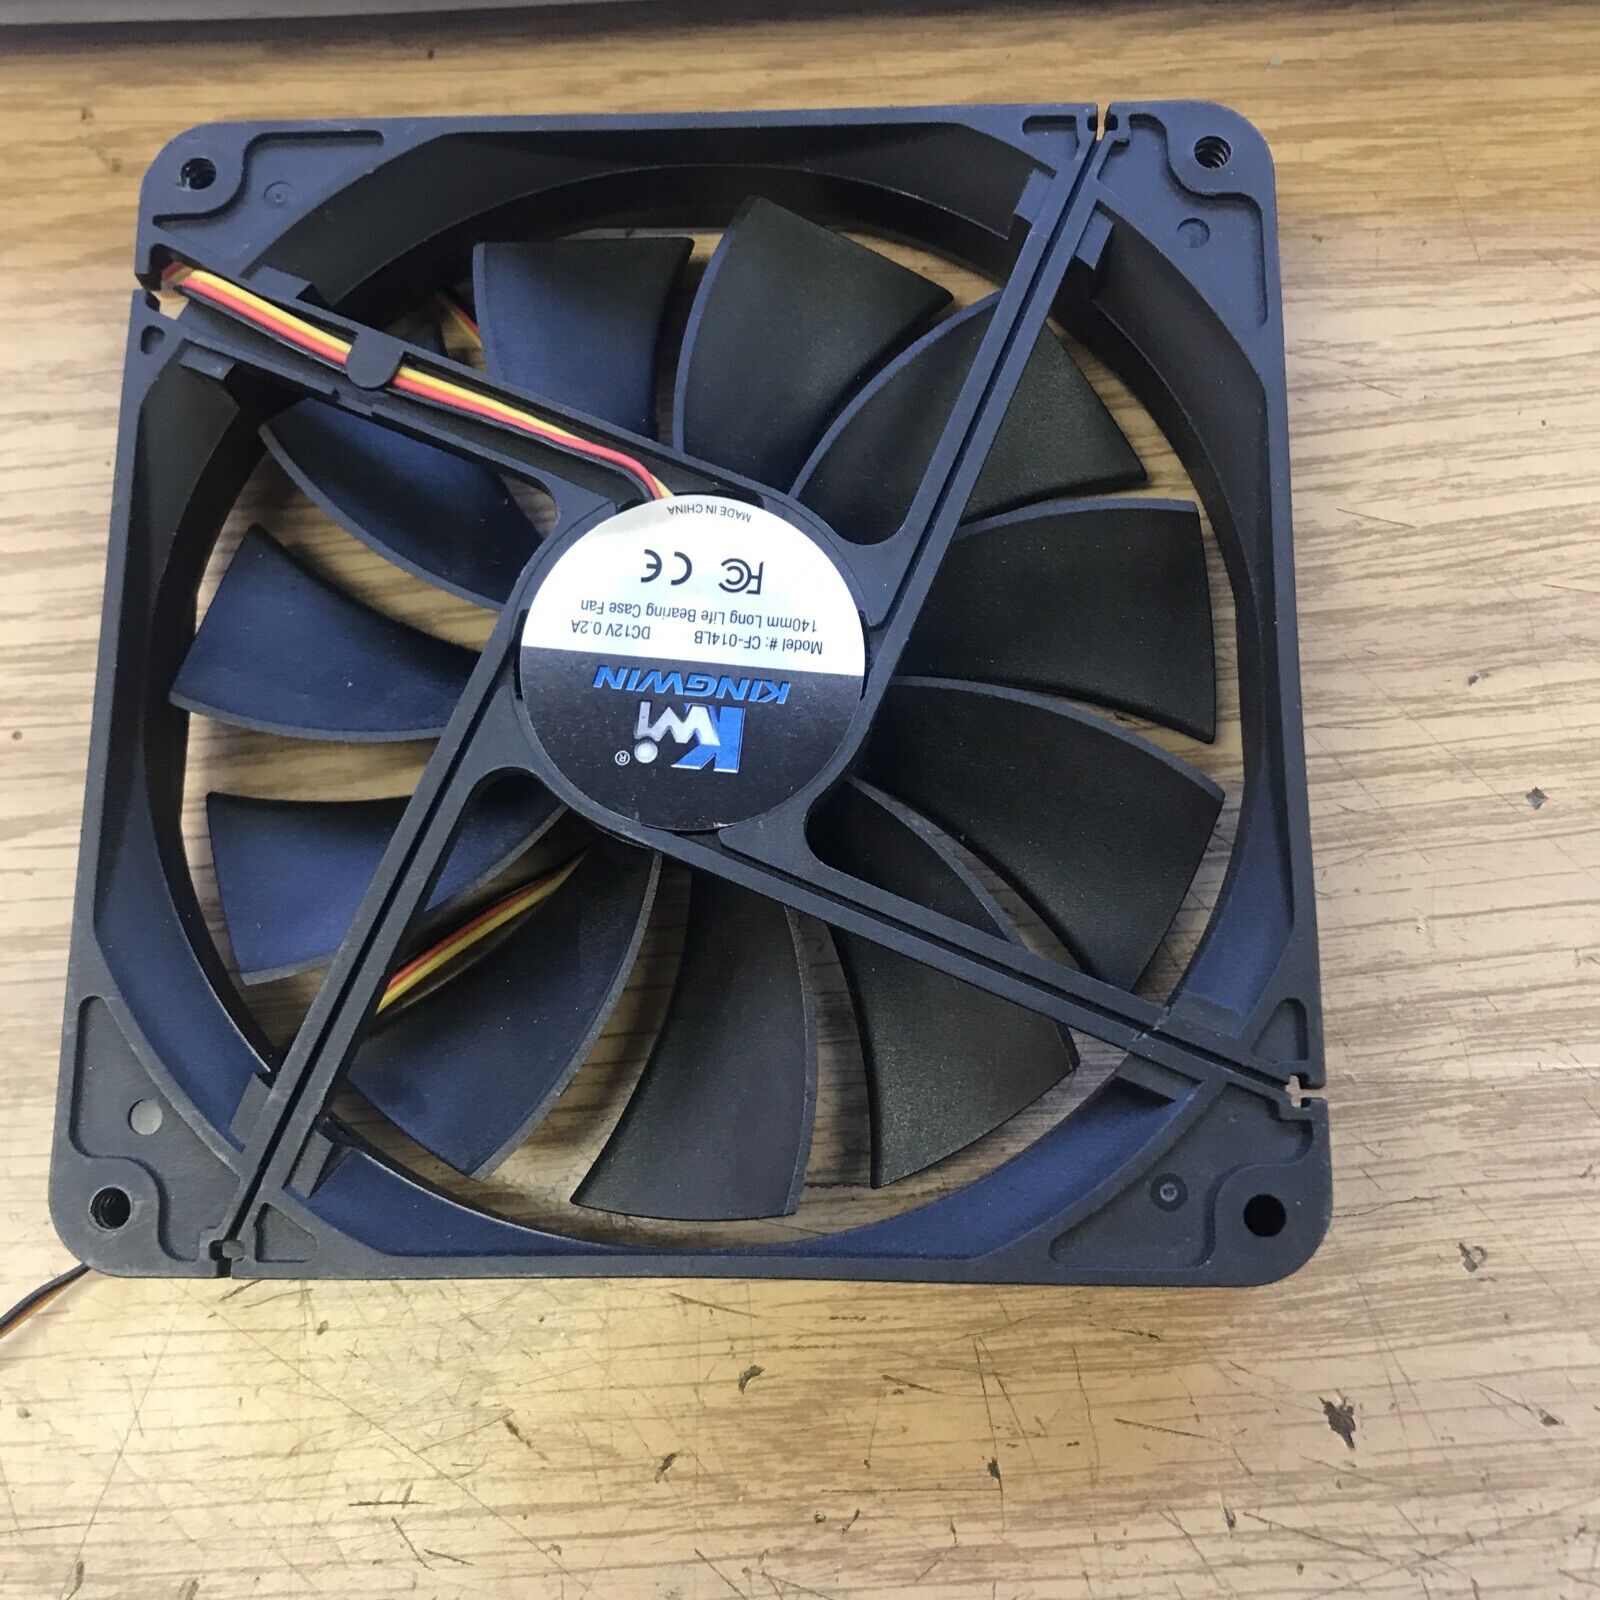 Kingwin 80mm CF-08LB Silent Fan For Computer Cases CPU Coolers